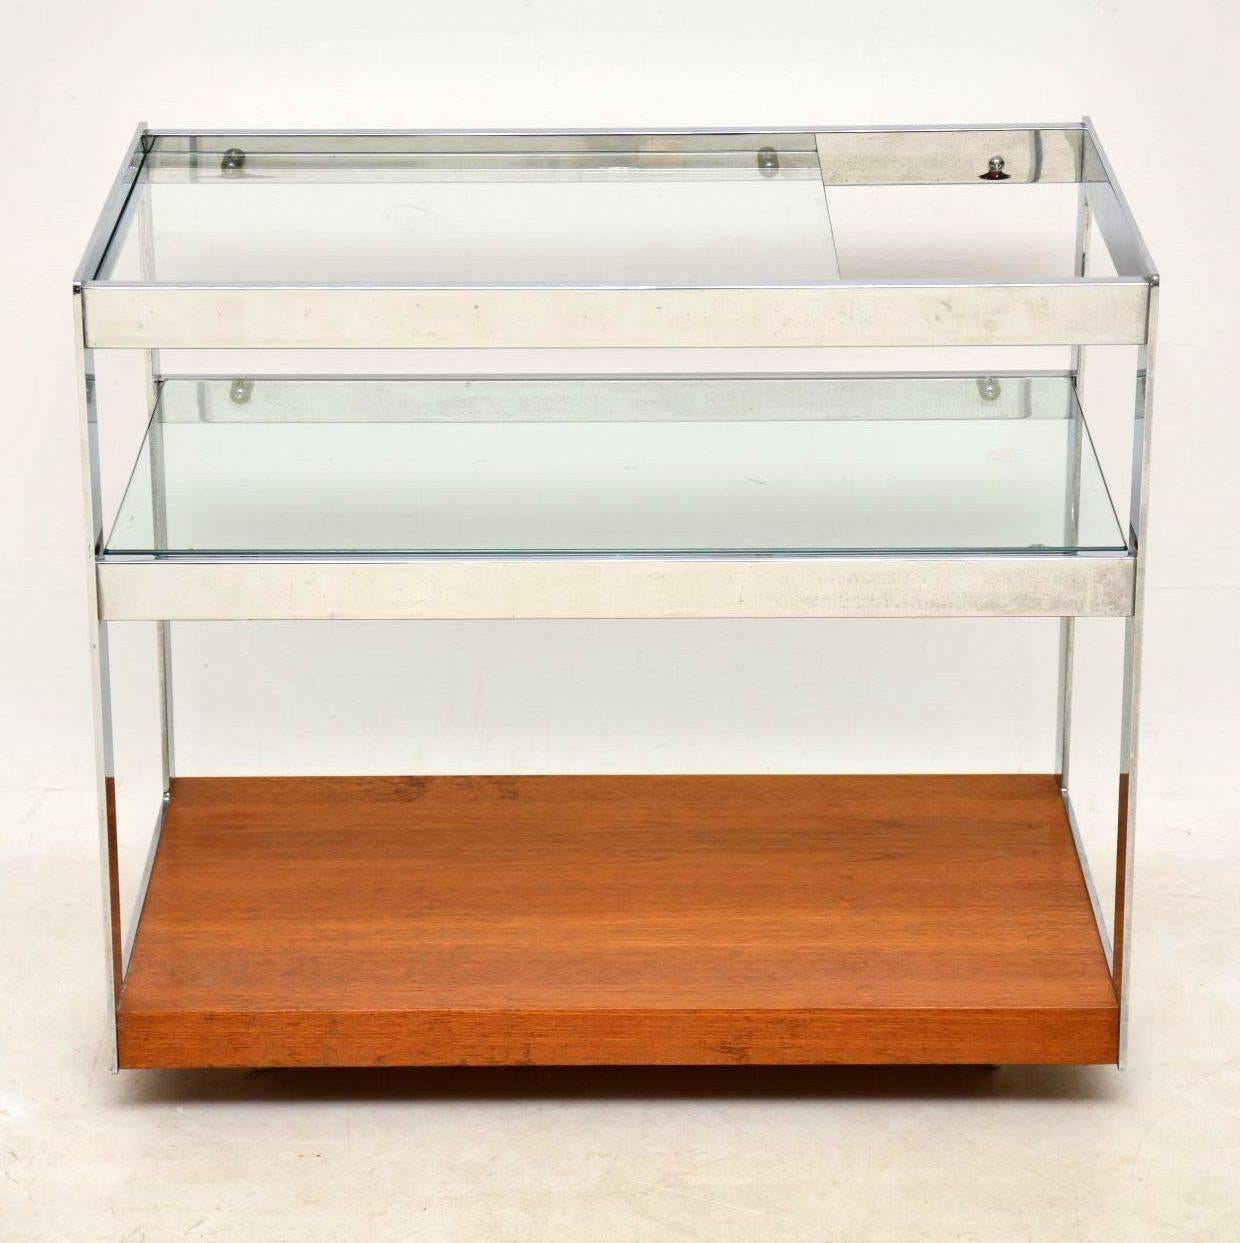 A stunning and rare drinks trolley, this was designed by Richard Young for Merrow Associates, it dates from the 1970s. These are very rare, and they usually come in rosewood, they are hardly ever seen in teak. This is in good vintage condition with